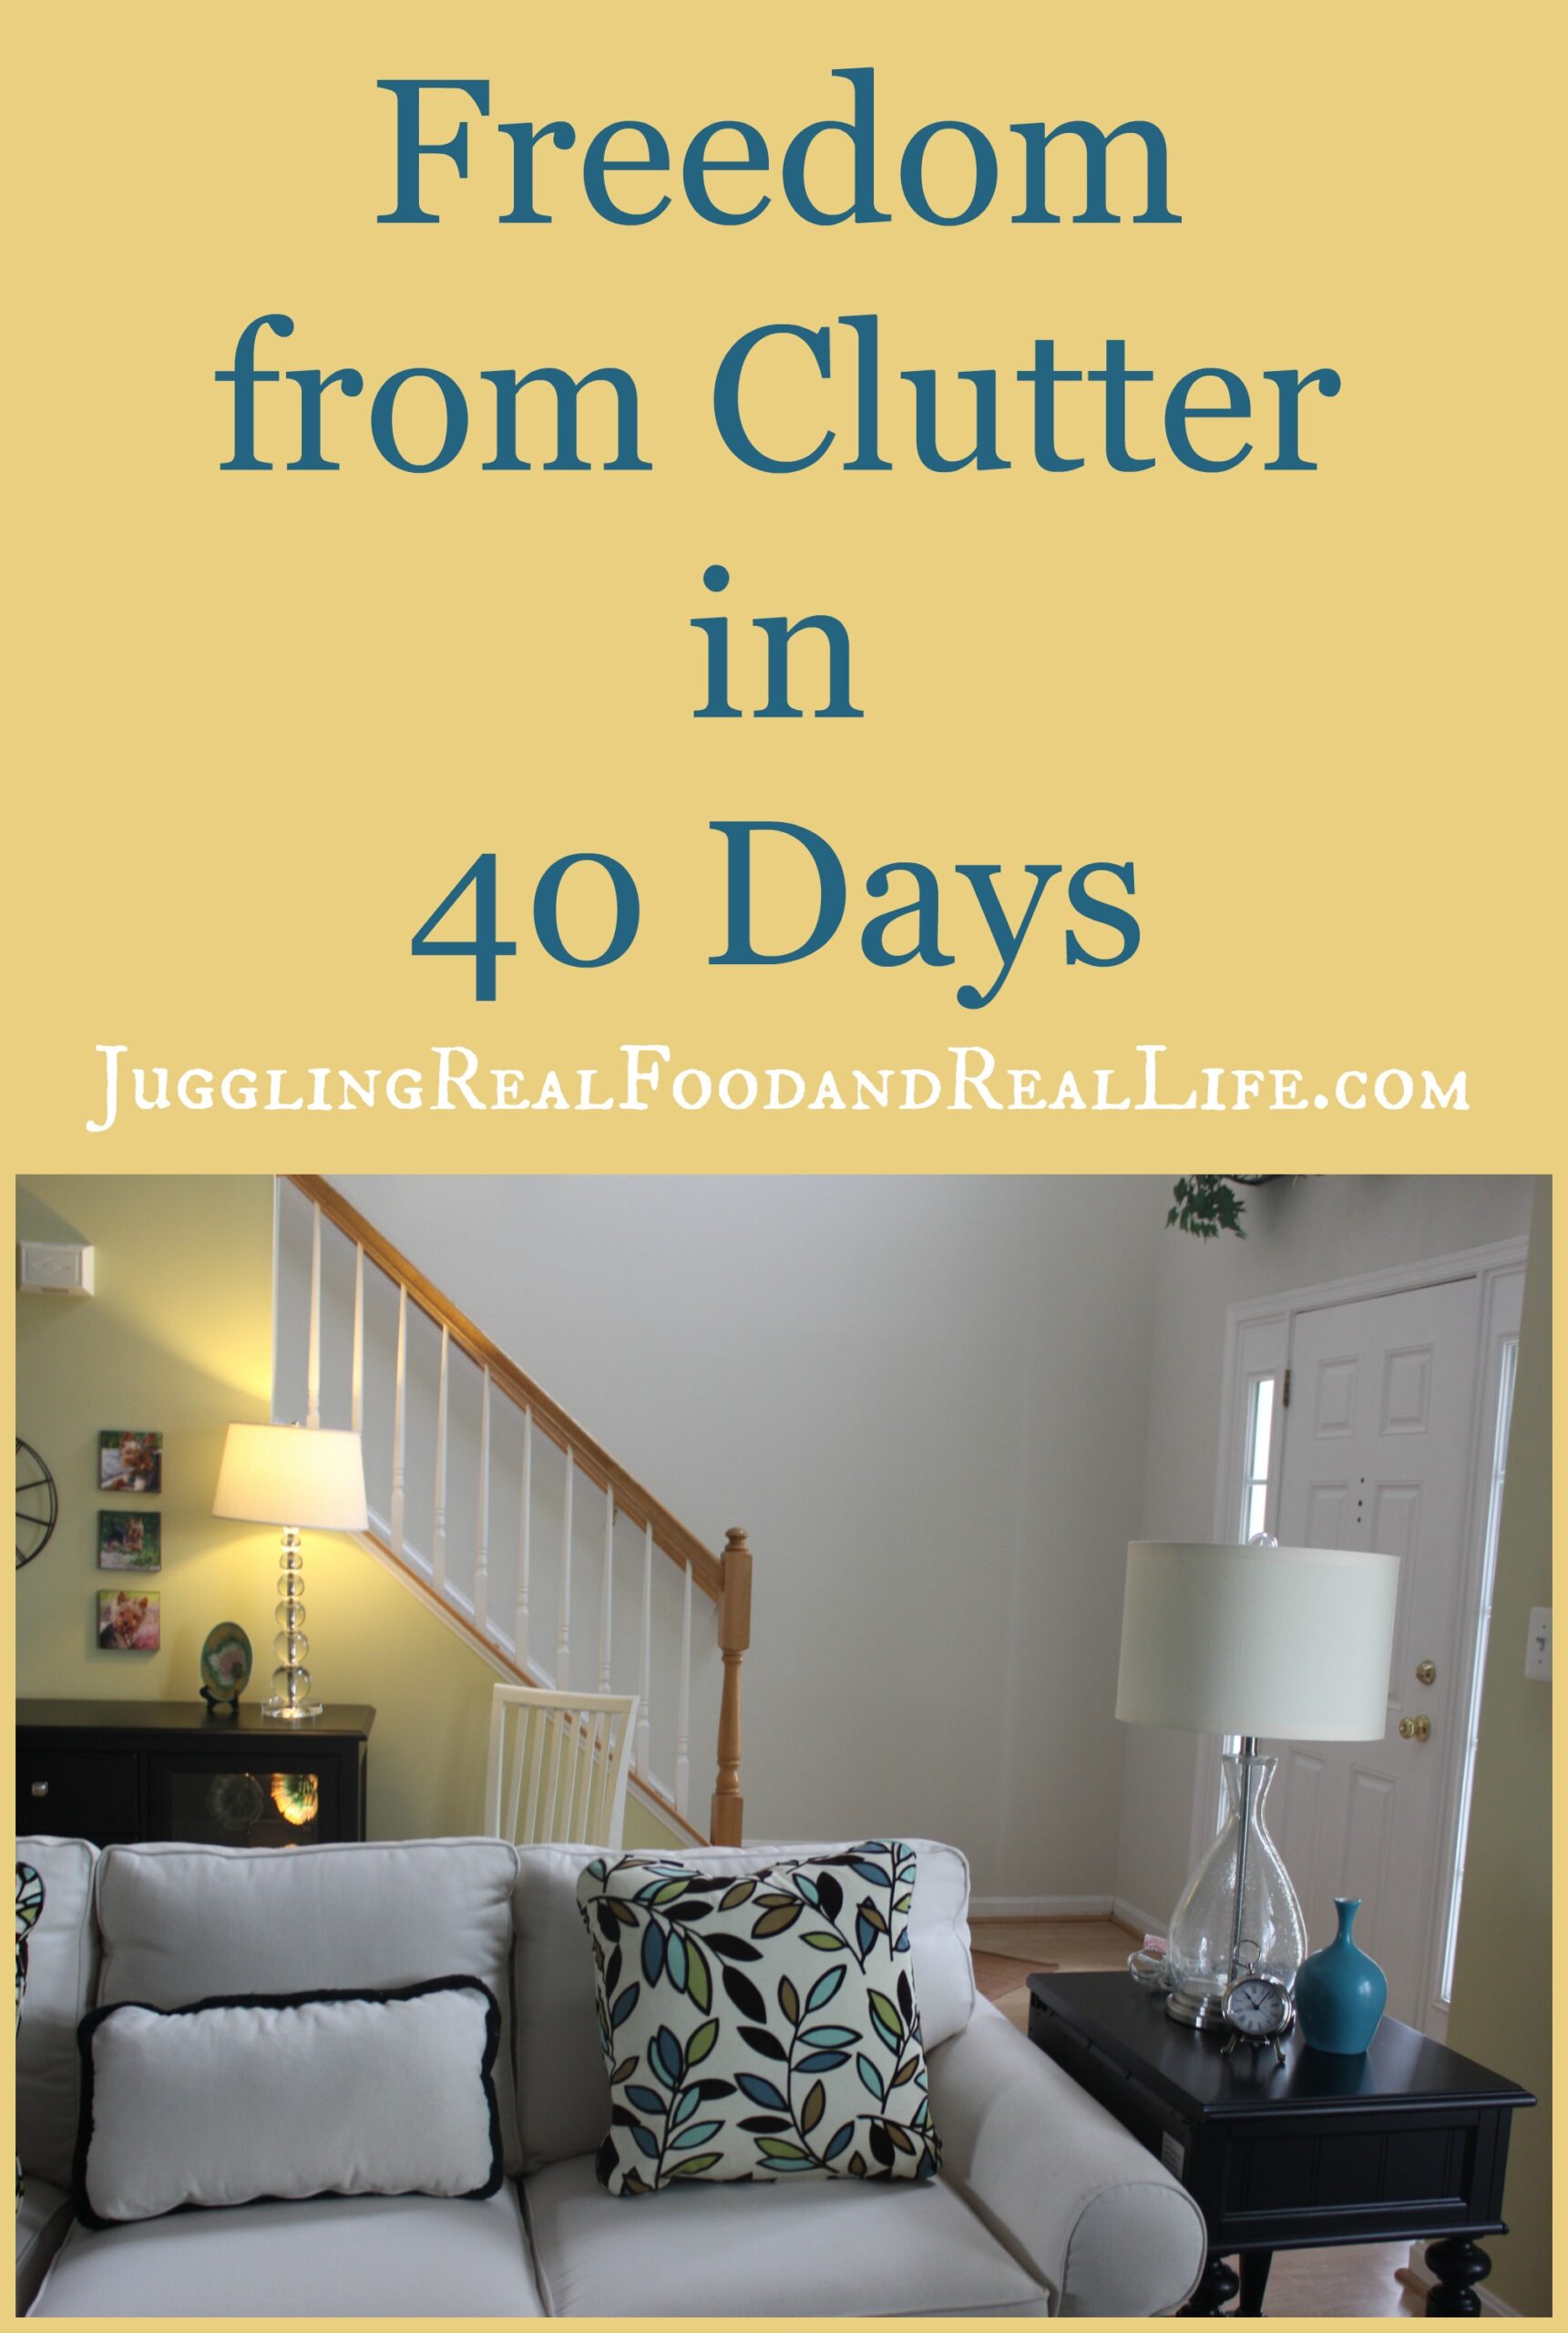 Freedom From Clutter in 40 Days